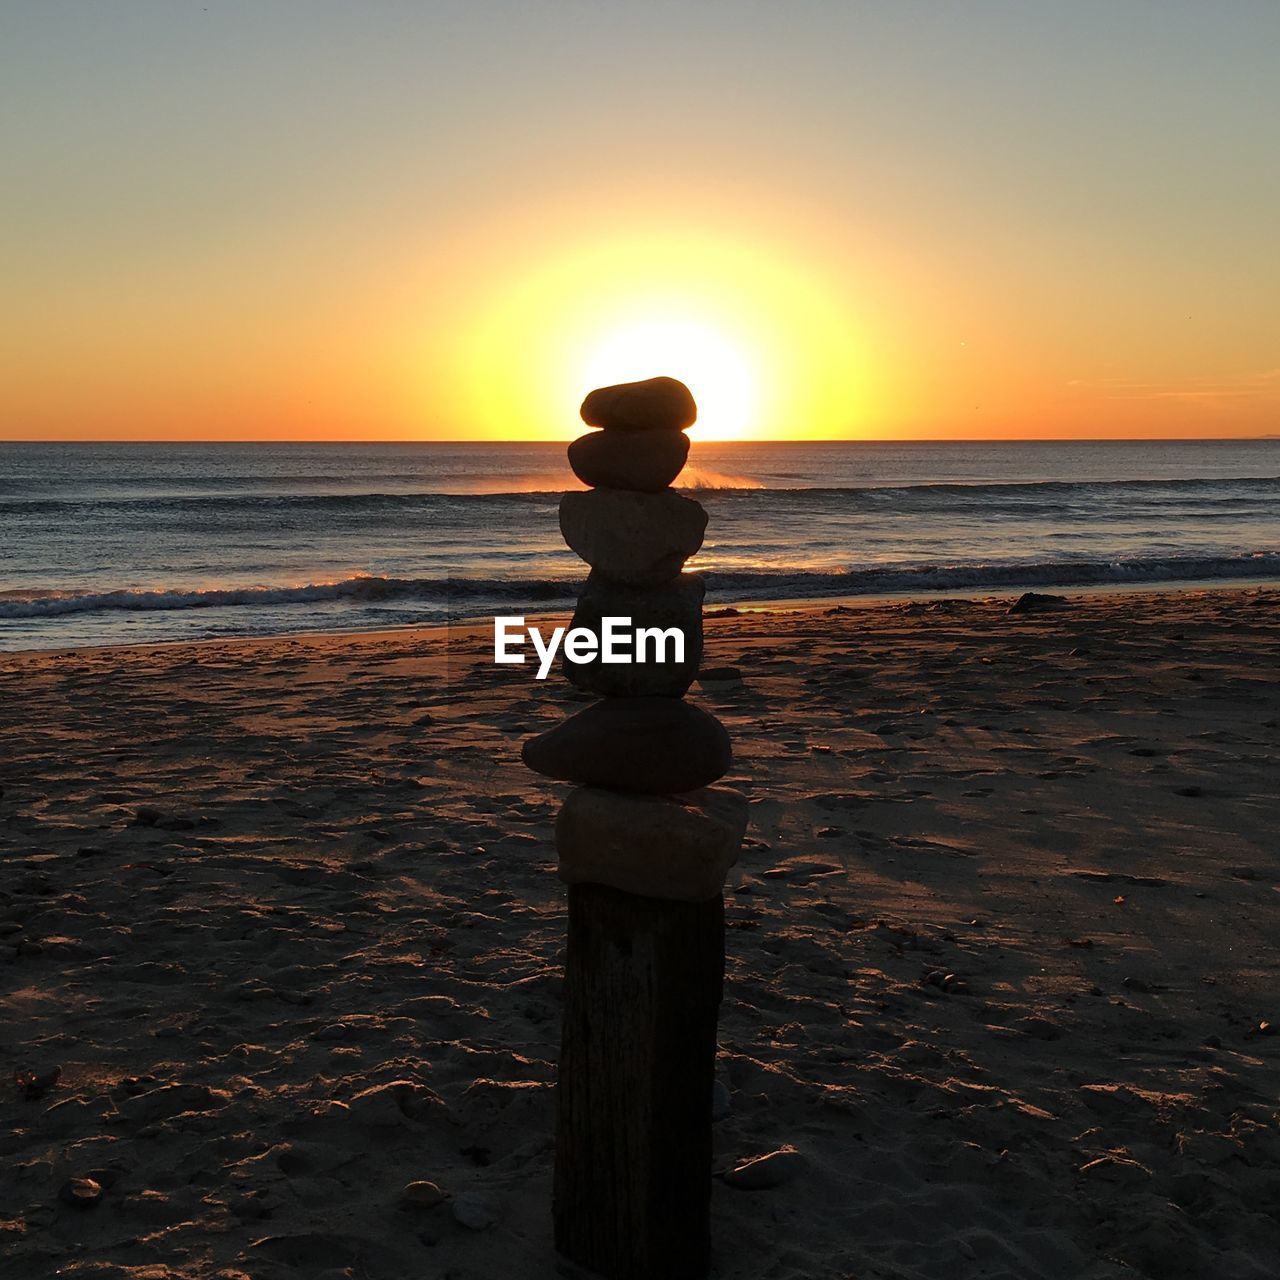 Back lit stones stack on wooden post at beach against sky during sunset